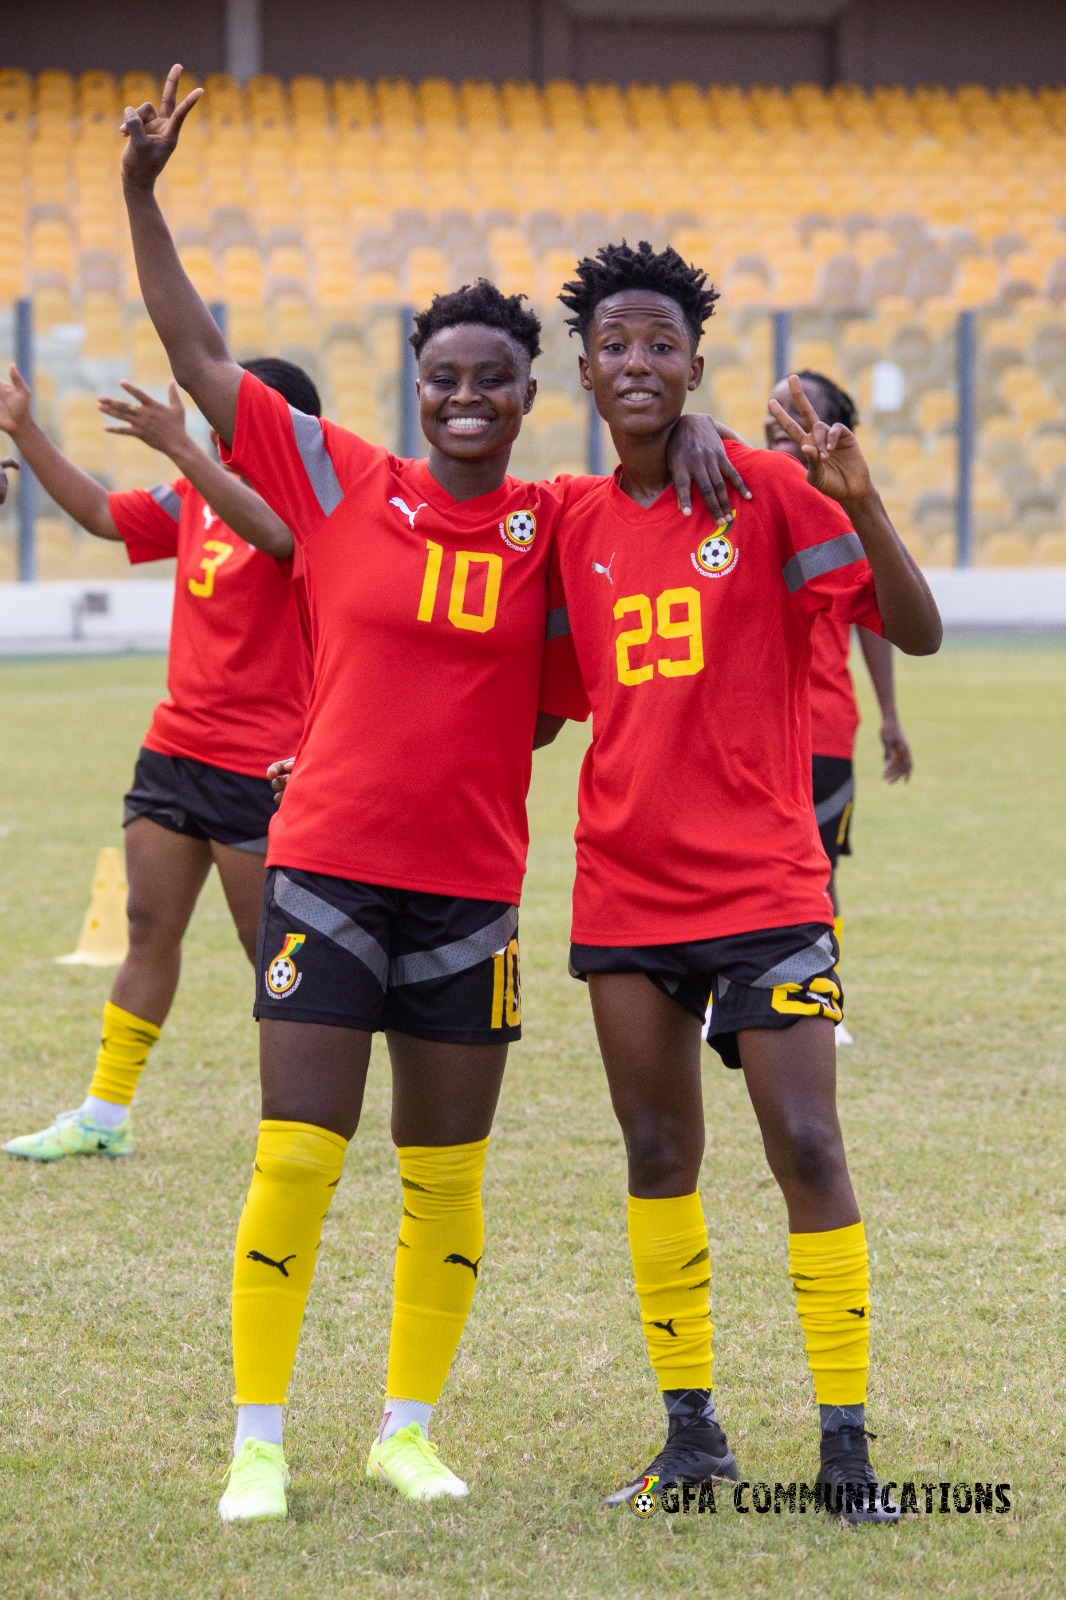 Black Queens face Lioness in another test match Tuesday